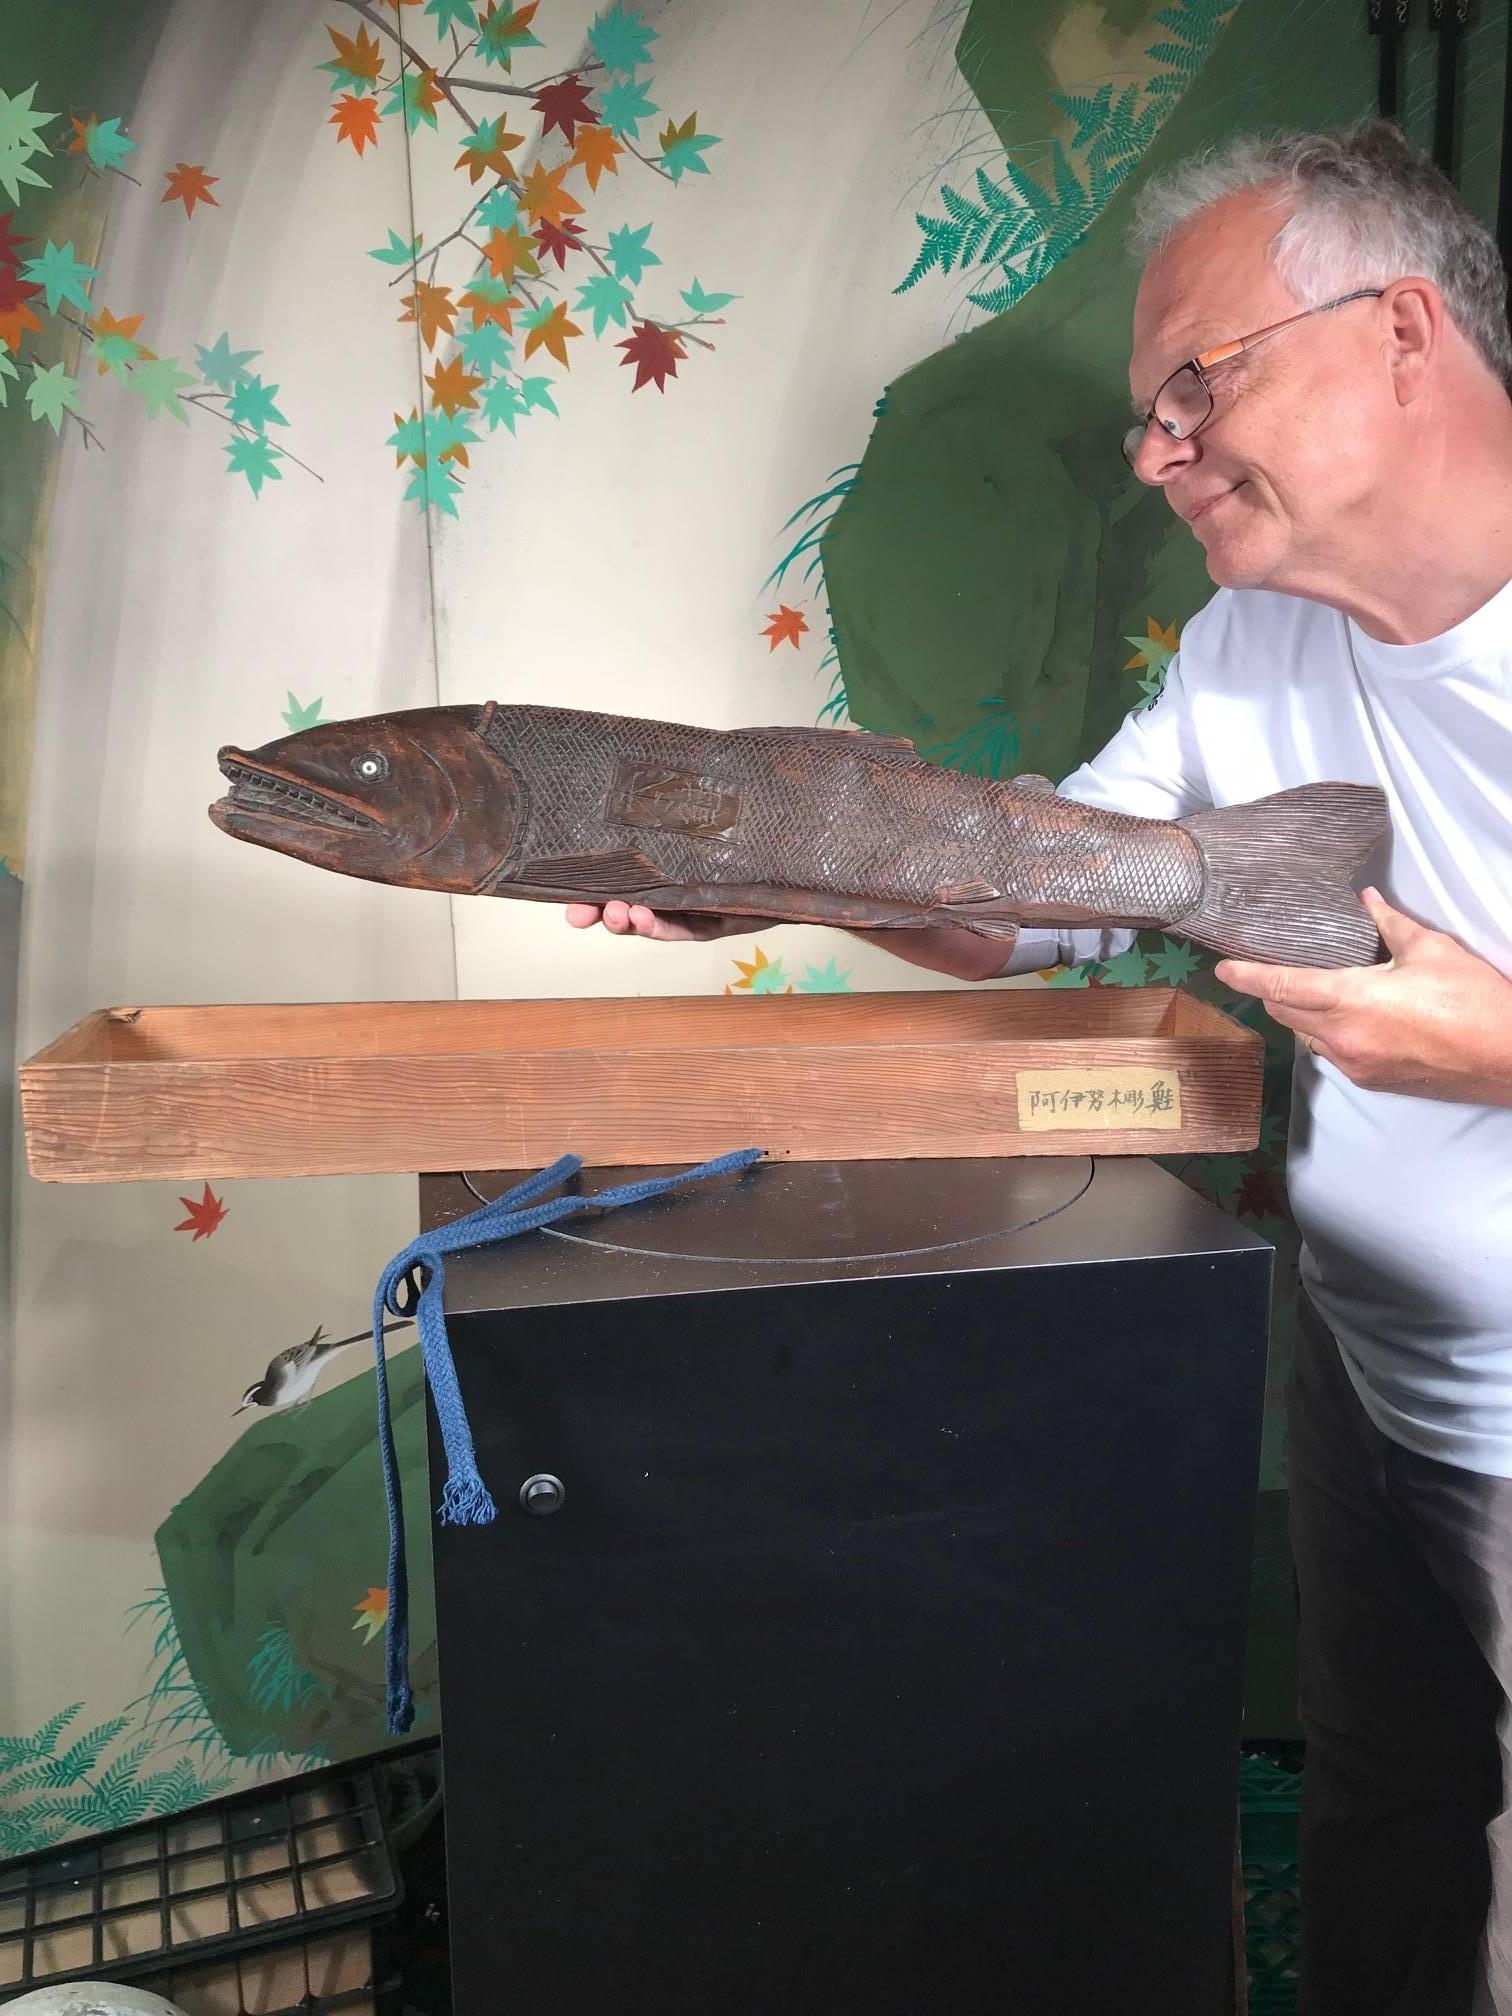 Own a rare one-of-a-kind Divine Fish.

A large-scale fine old Japanese hand-carved wooden salmon fish- important symbolic work of art suggesting prosperity and good fortune in the Japanese ainu people's culture from Hokkaido Island. This big fish is